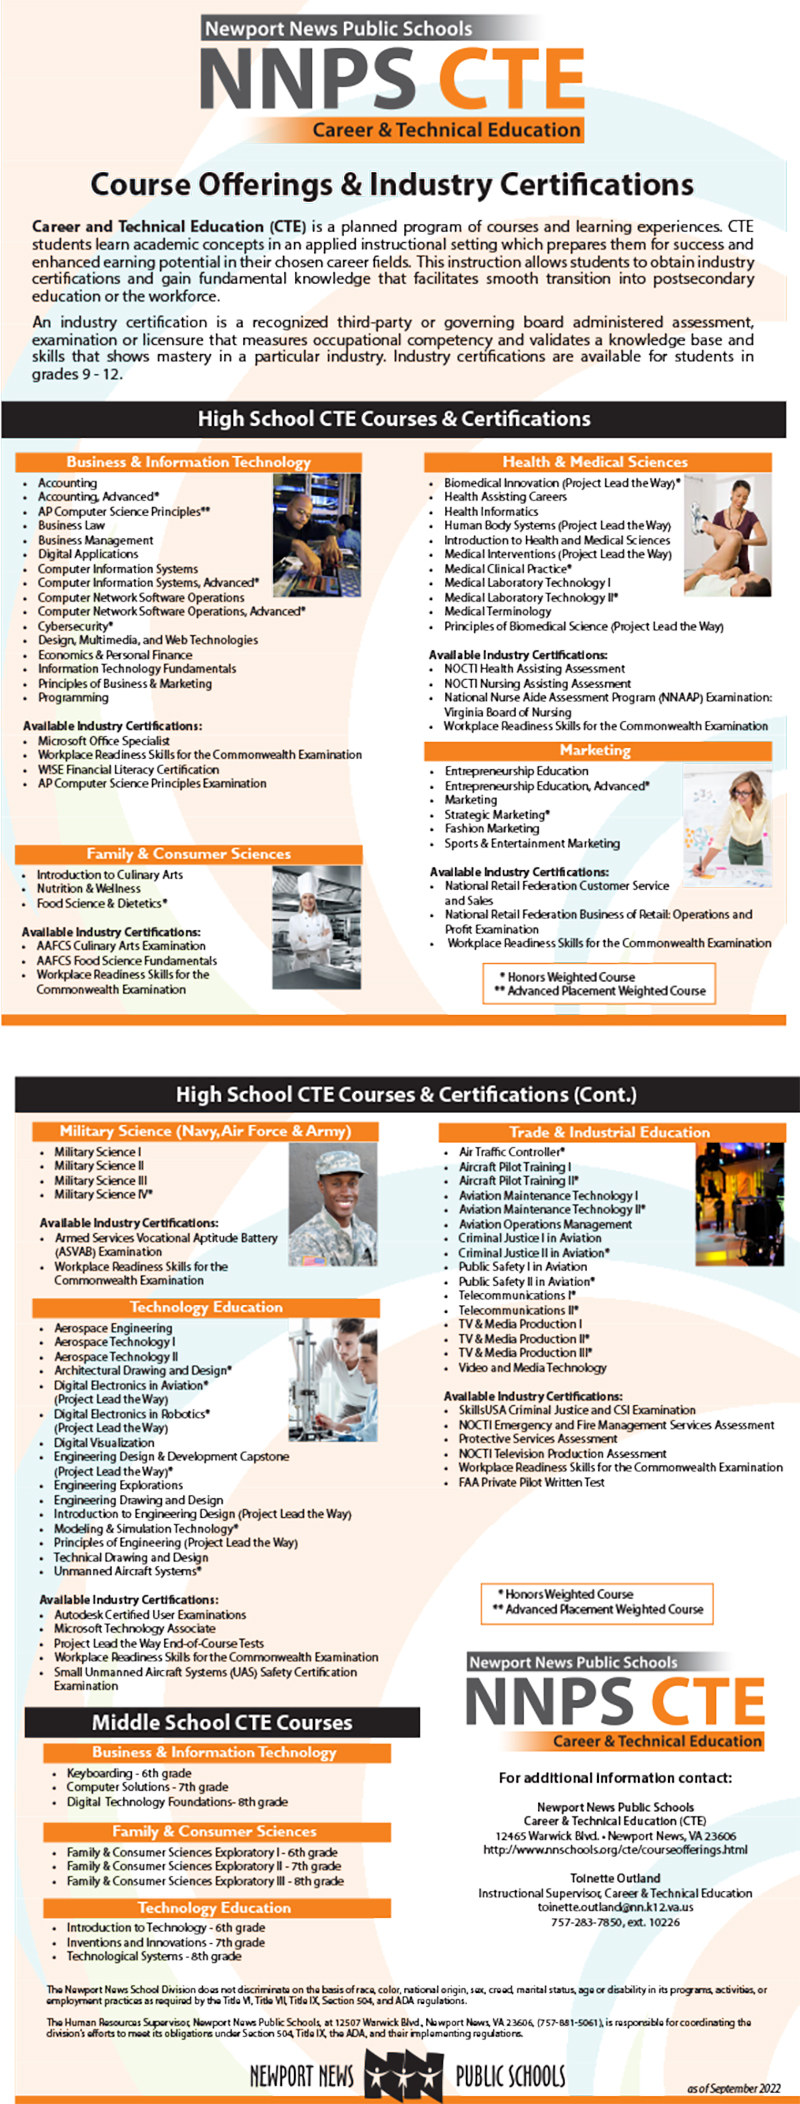 Click image of CTE Course Offerings to download brochure.